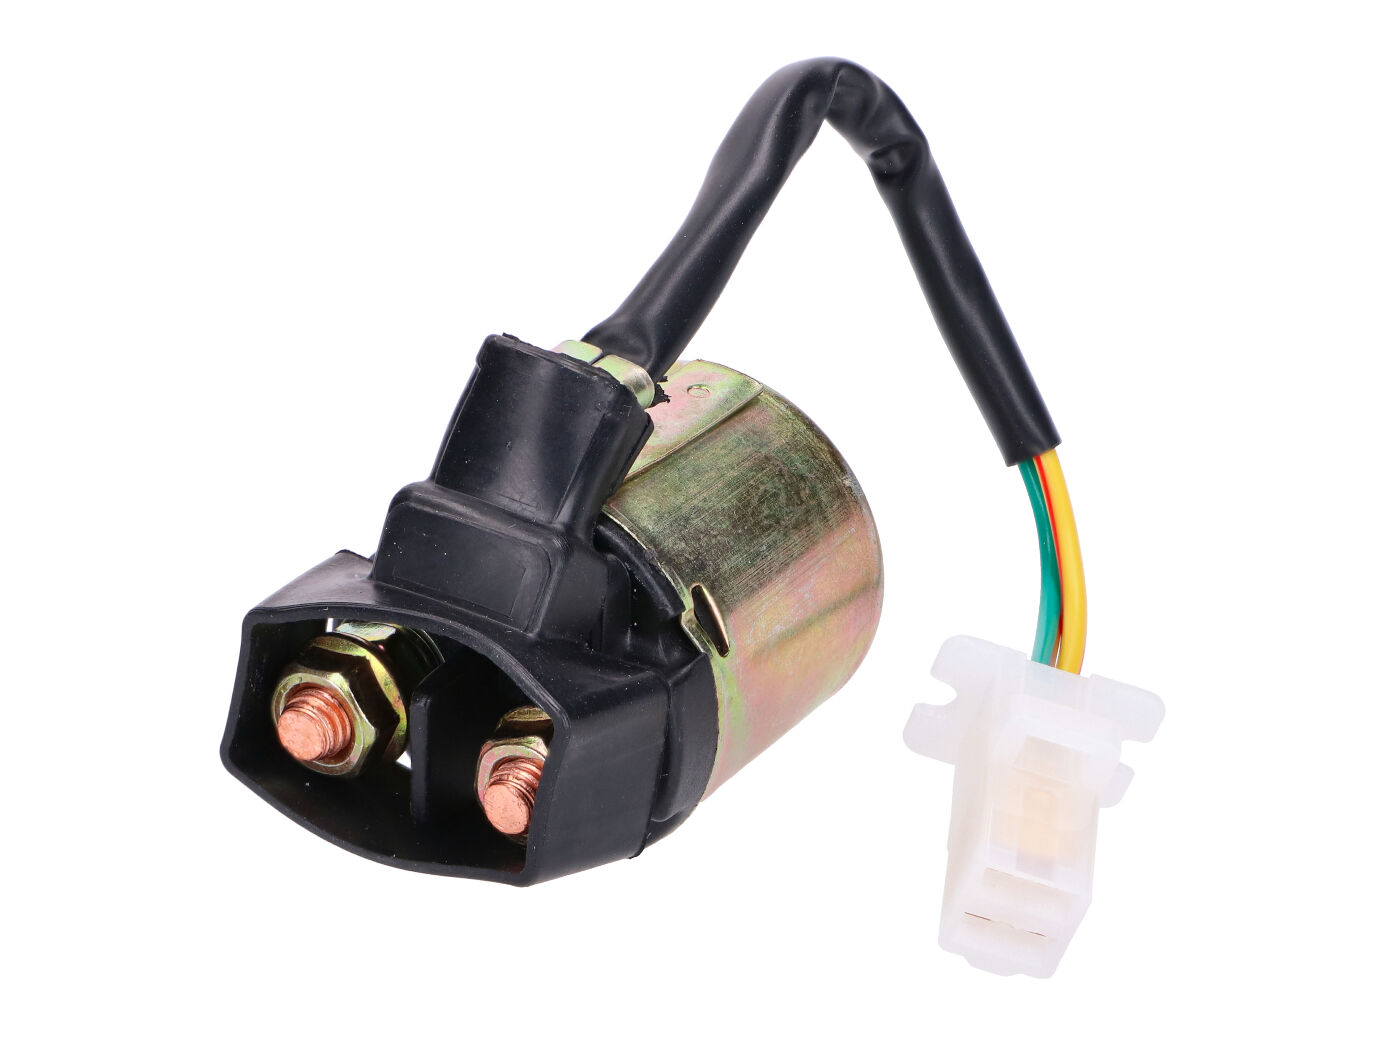 Peugeot Speedfight 2 LC WRC Rcup Motor Arranque Relé Solenoide 12v 30a 4 Pin 